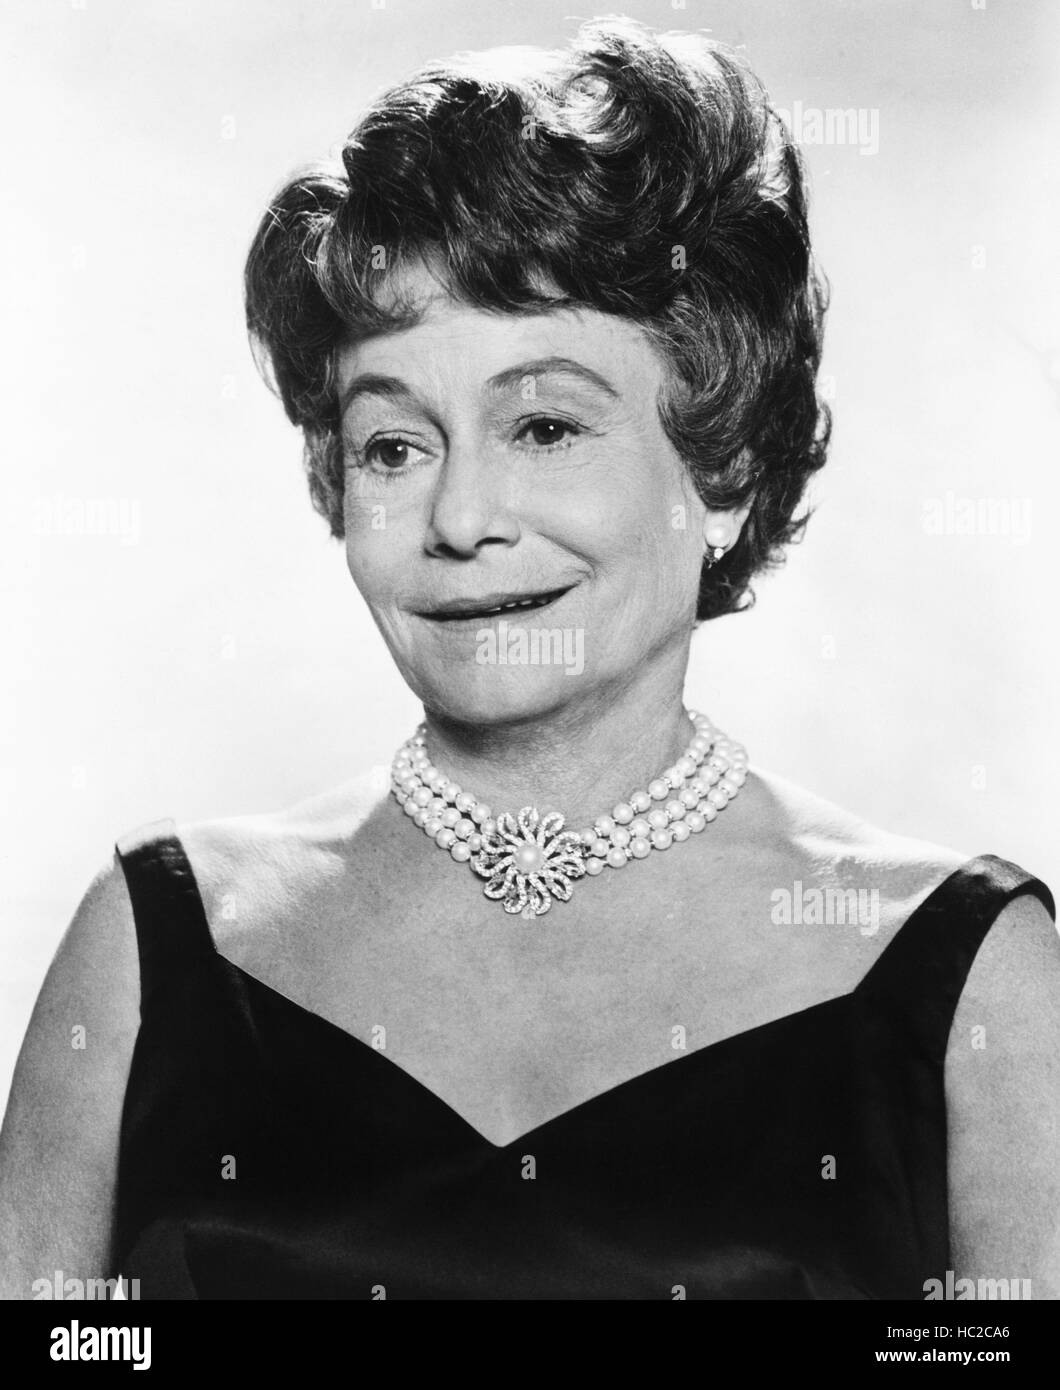 A NEW KIND OF LOVE, Thelma Ritter, 1963 Stock Photo - Alamy